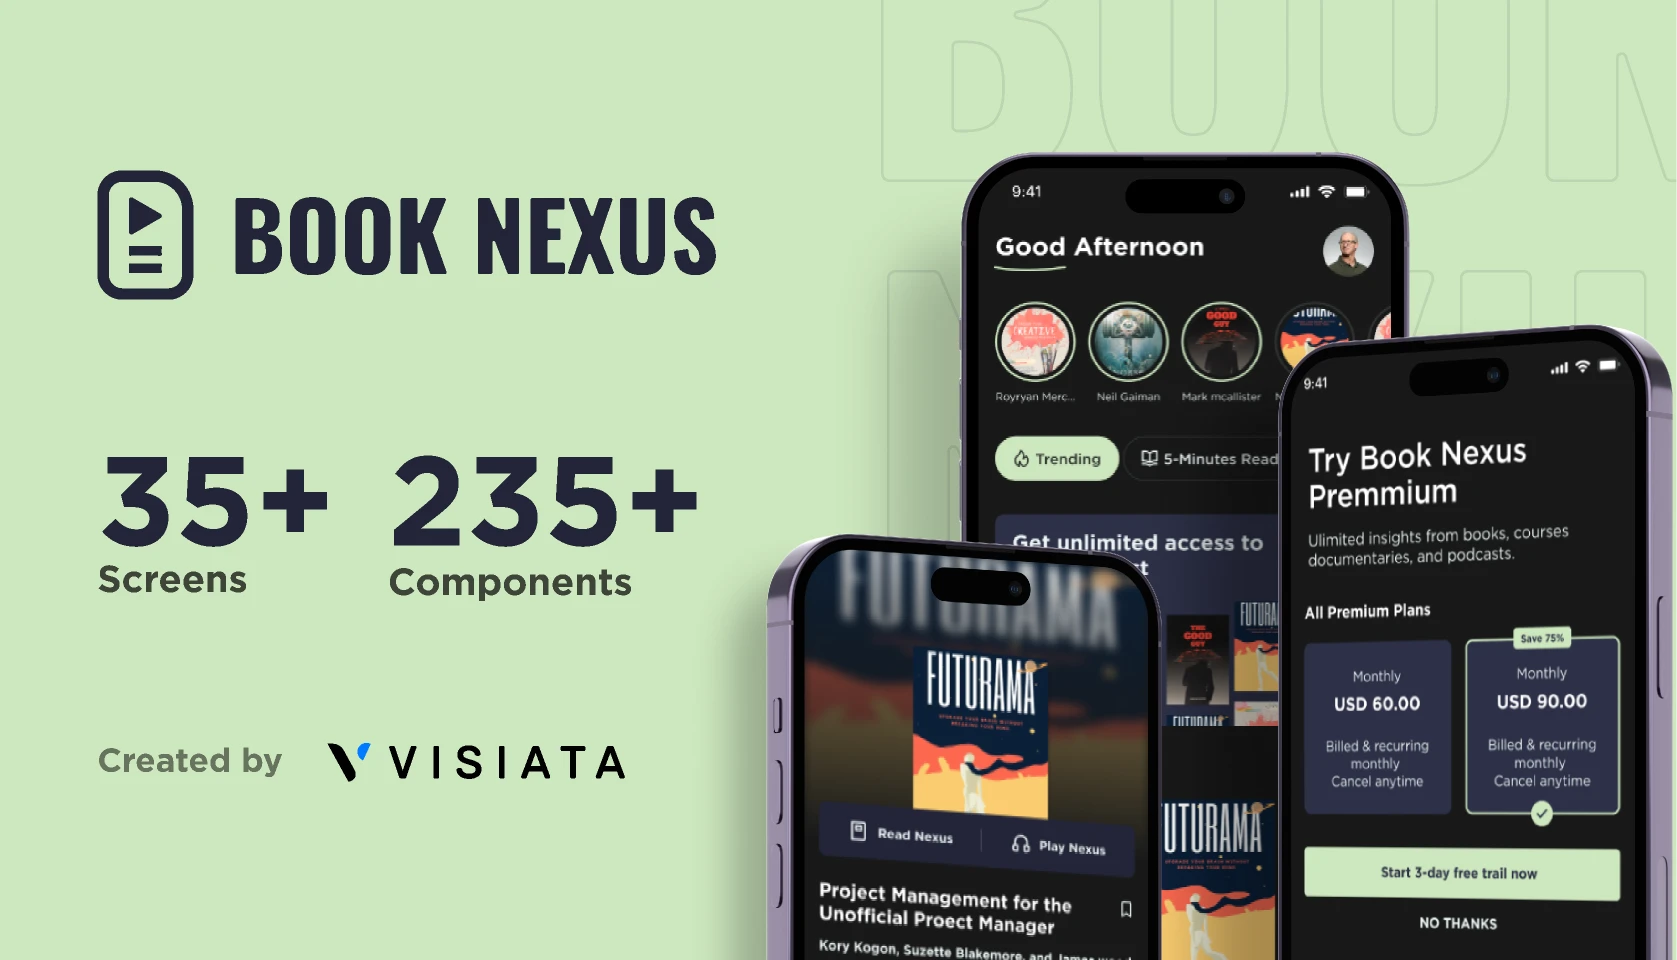 Book nexus - listen and read your favorite books for Figma and Adobe XD